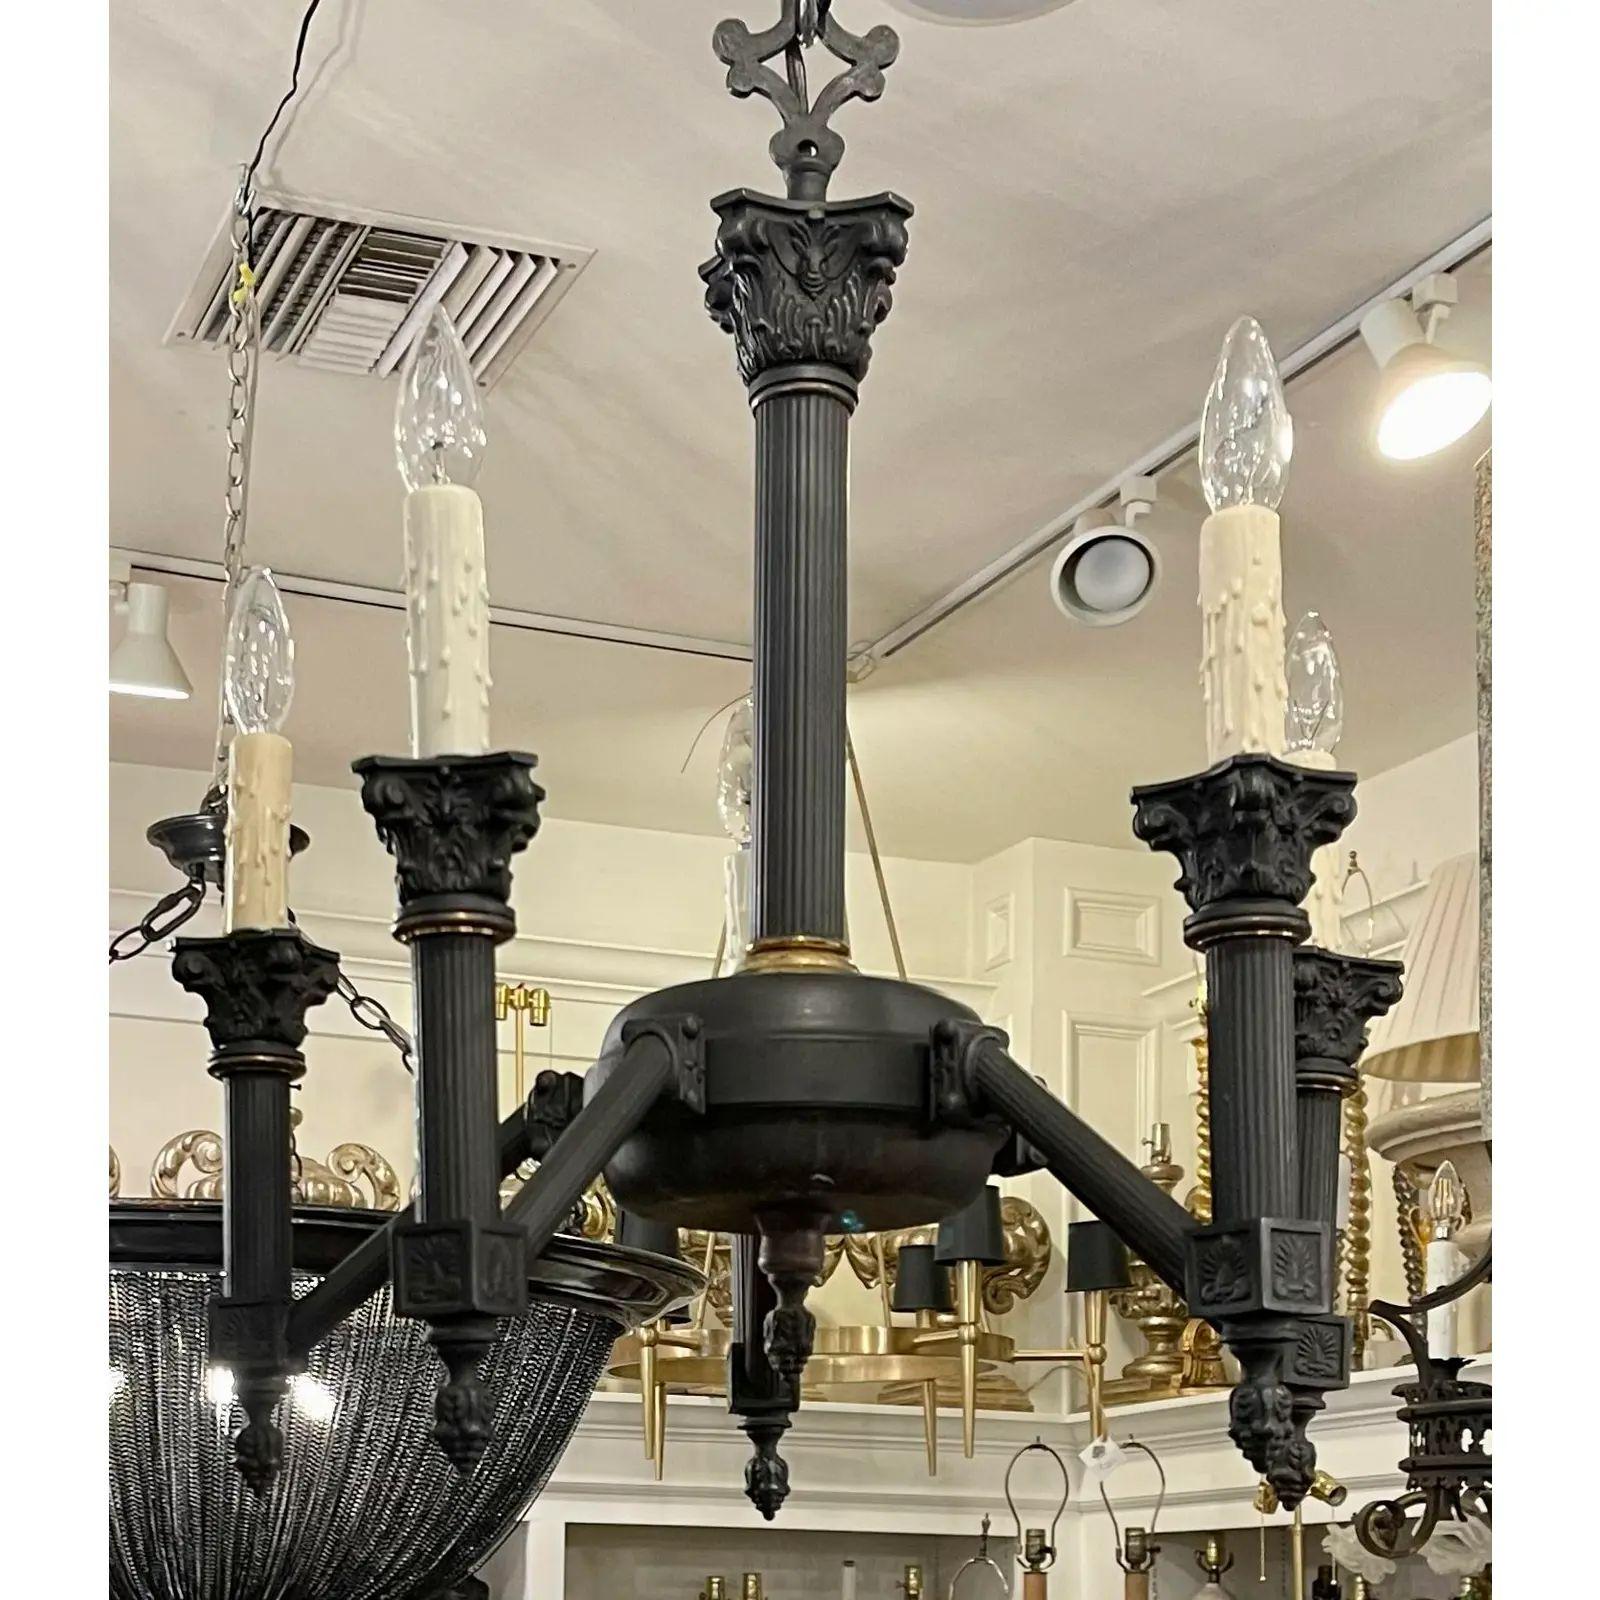 Empire Style Black Neoclassical Corinthian column six light chandelier
Priced each

Additional information: 
Materials: Lights
Color: Black
Period: 2000 - 2009
Styles: Empire, Neoclassical
Power Sources: Up to 120V (US Standard),